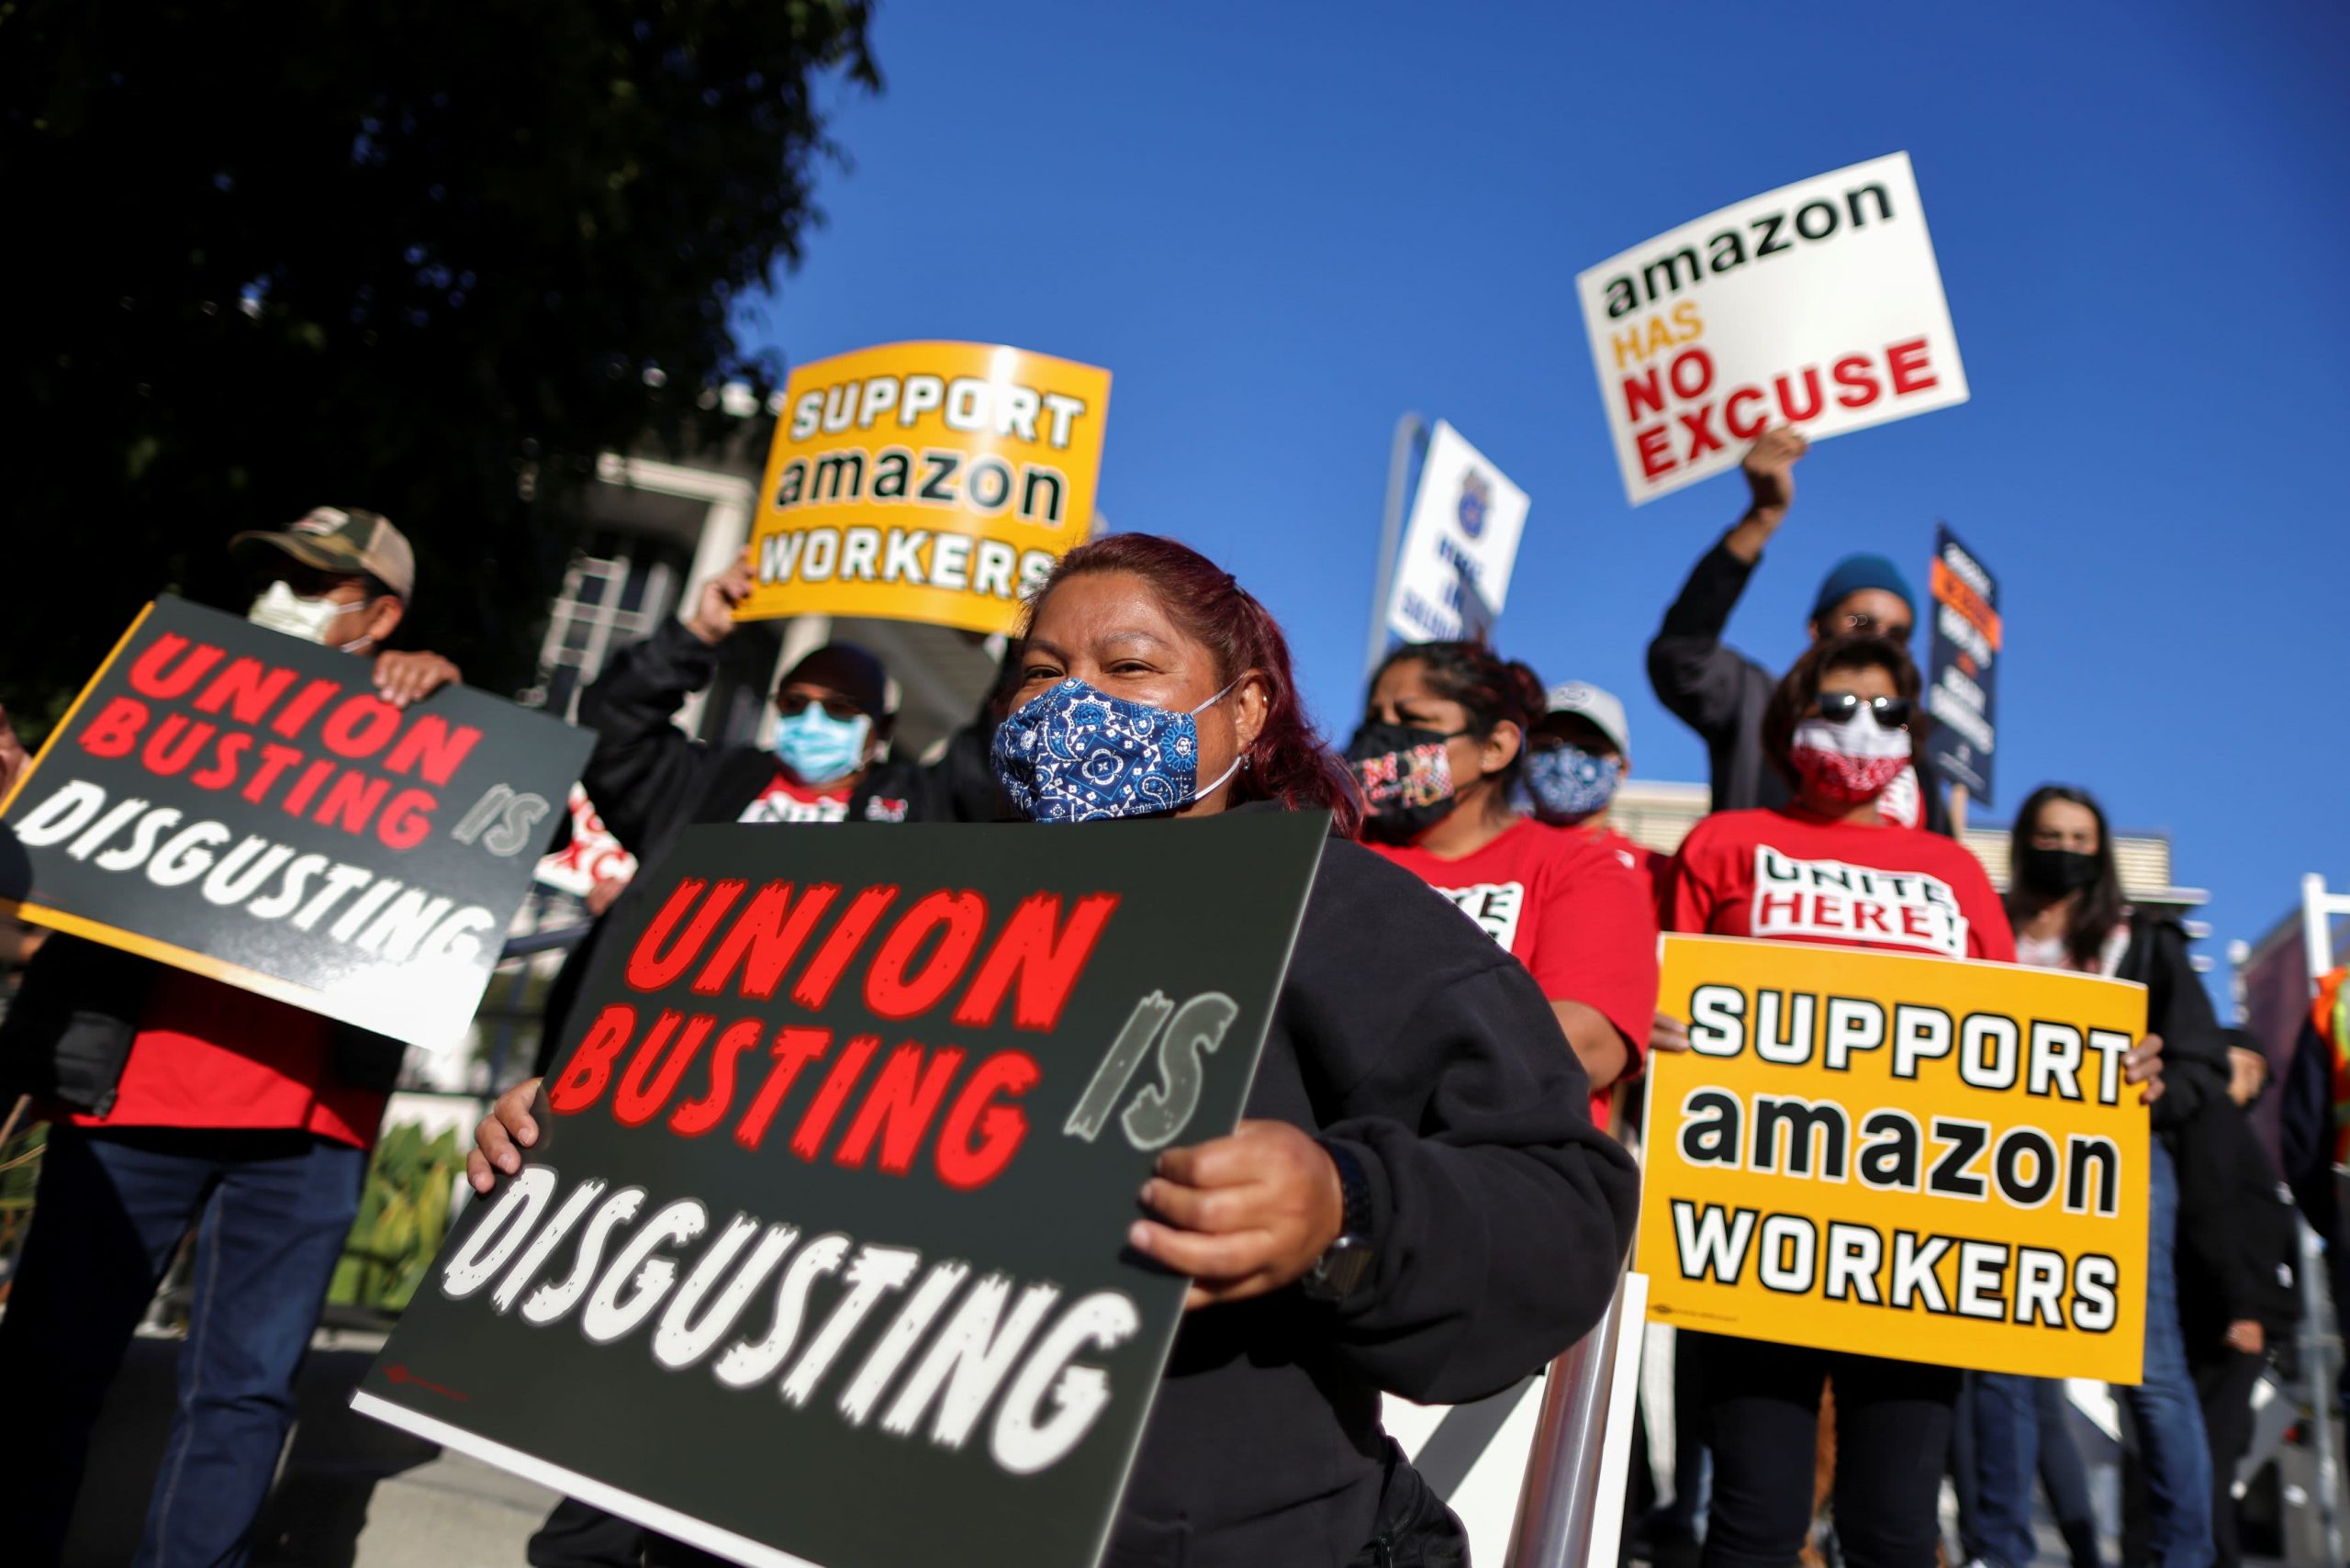 People protest in support of the unionizing efforts of the Alabama Amazon workers, in Los Angeles, California, March 22, 2021.